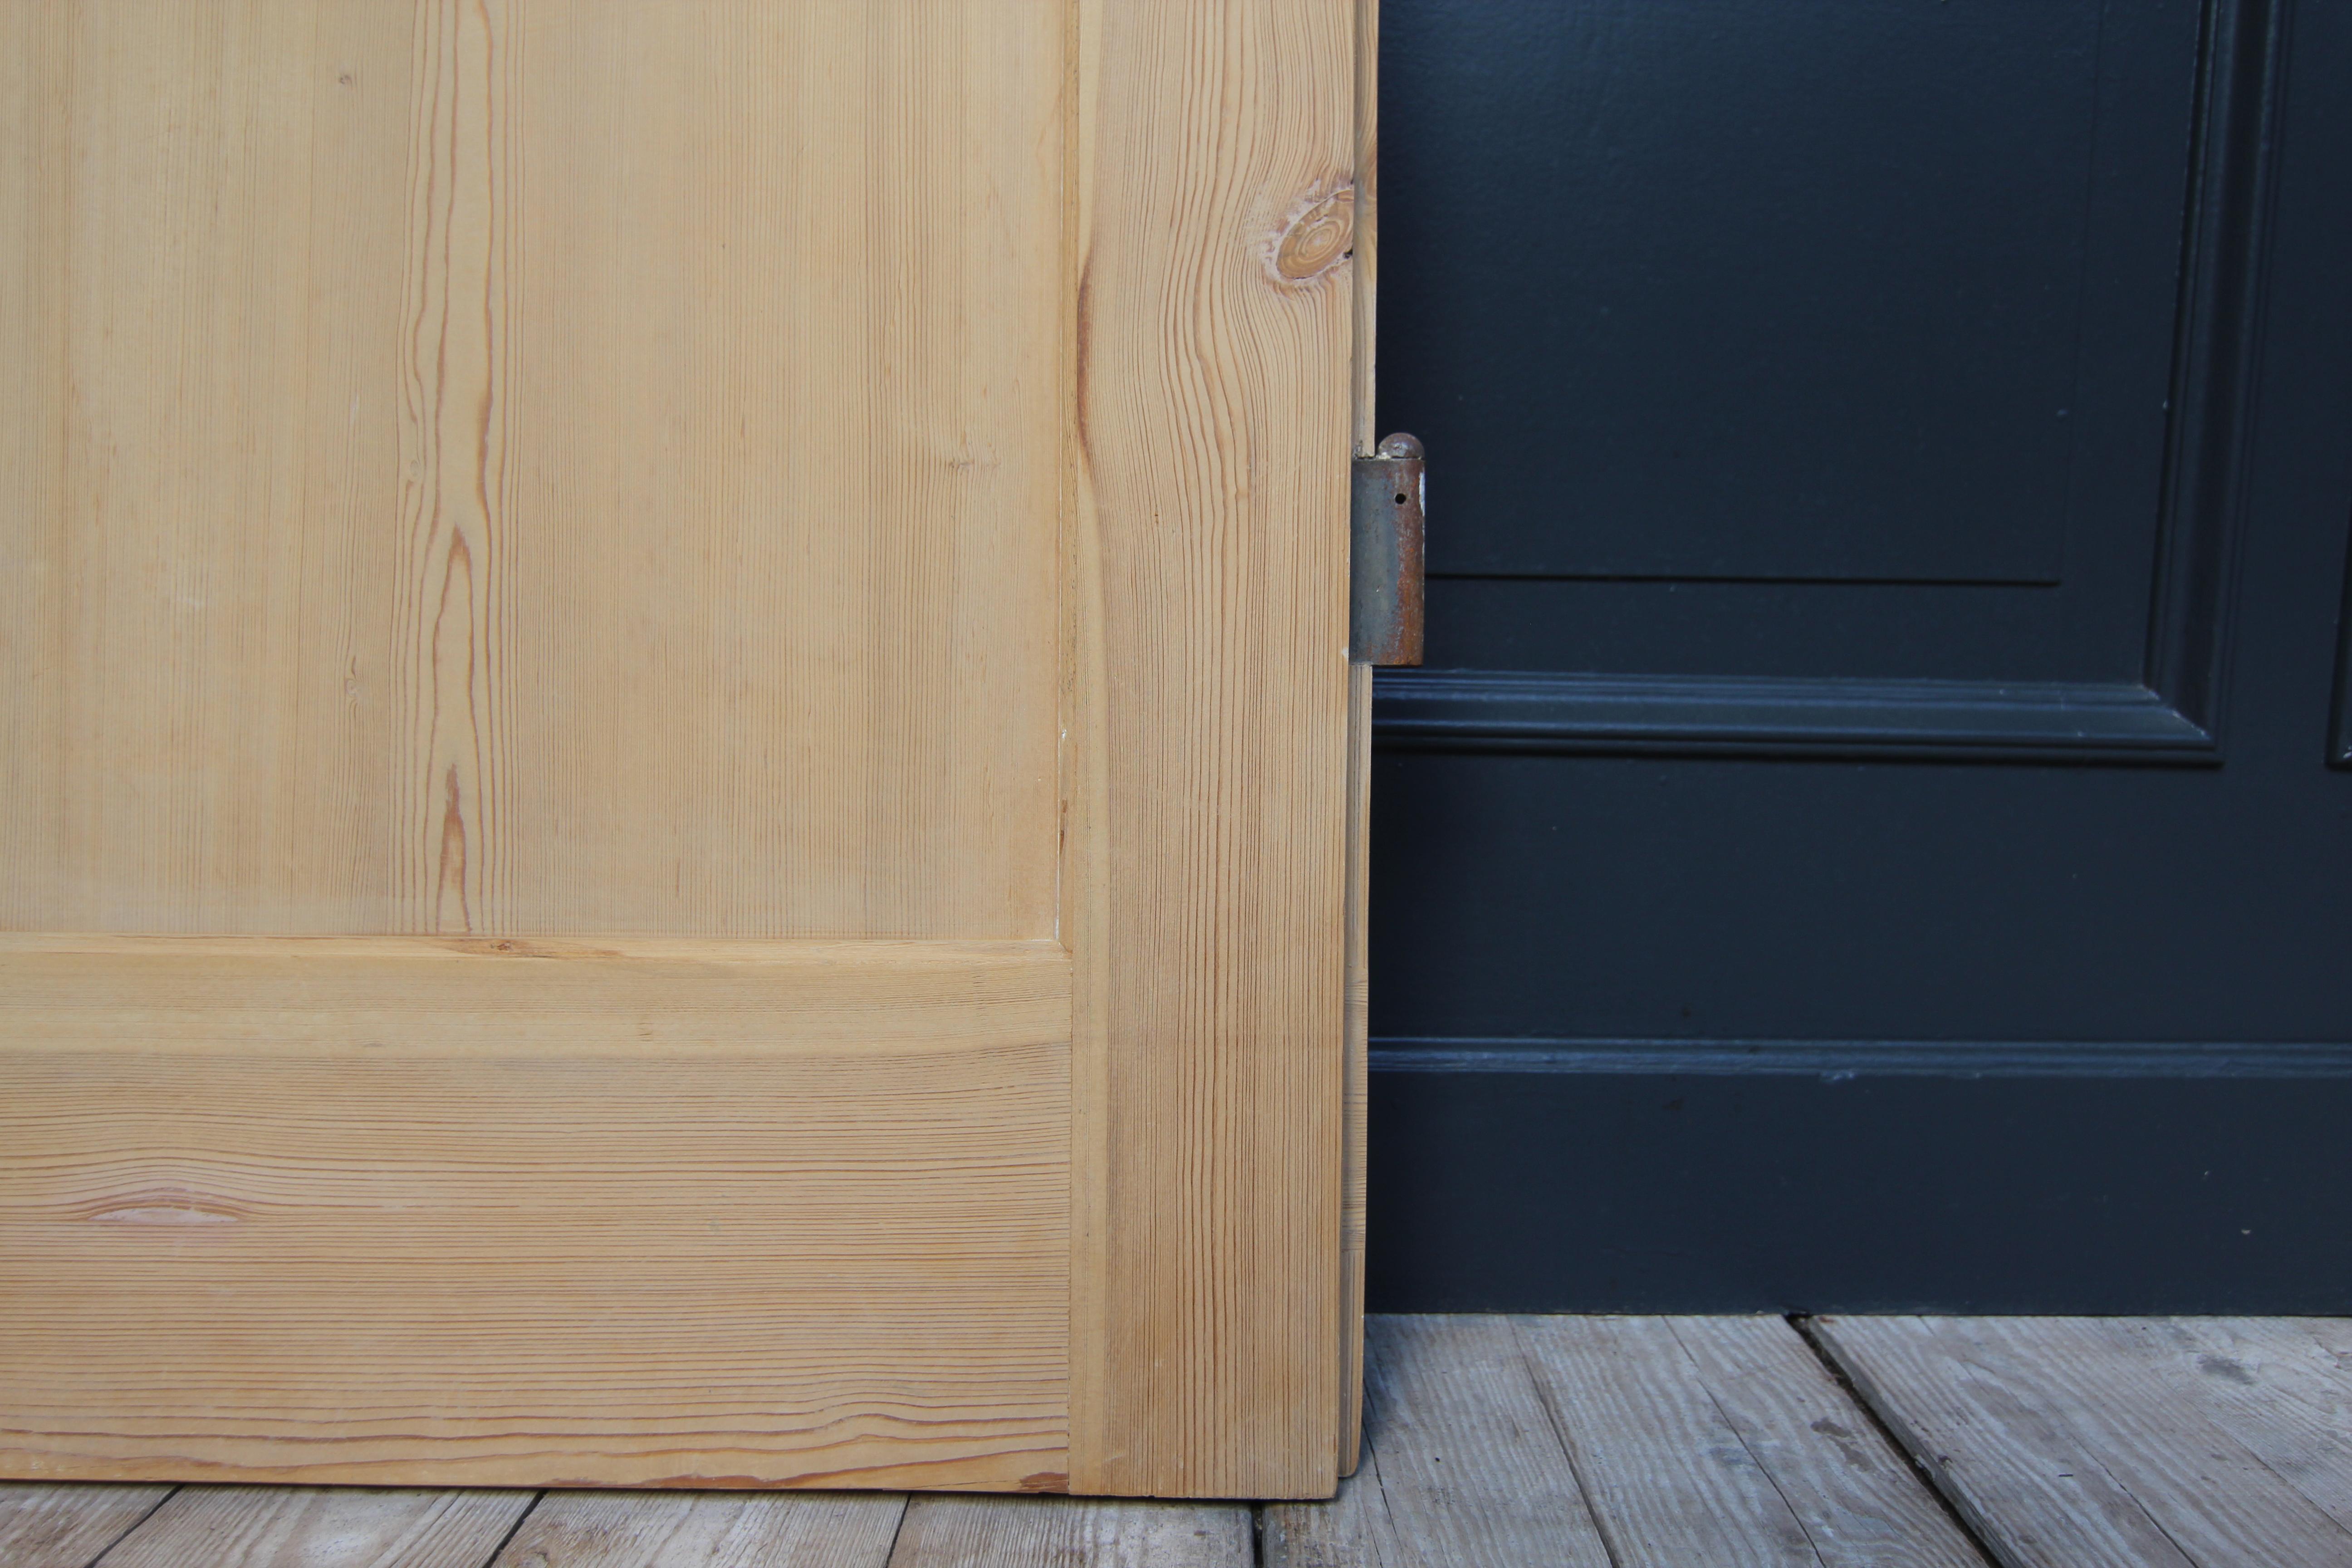 Early 20th Century Double Door made of Pine For Sale 12